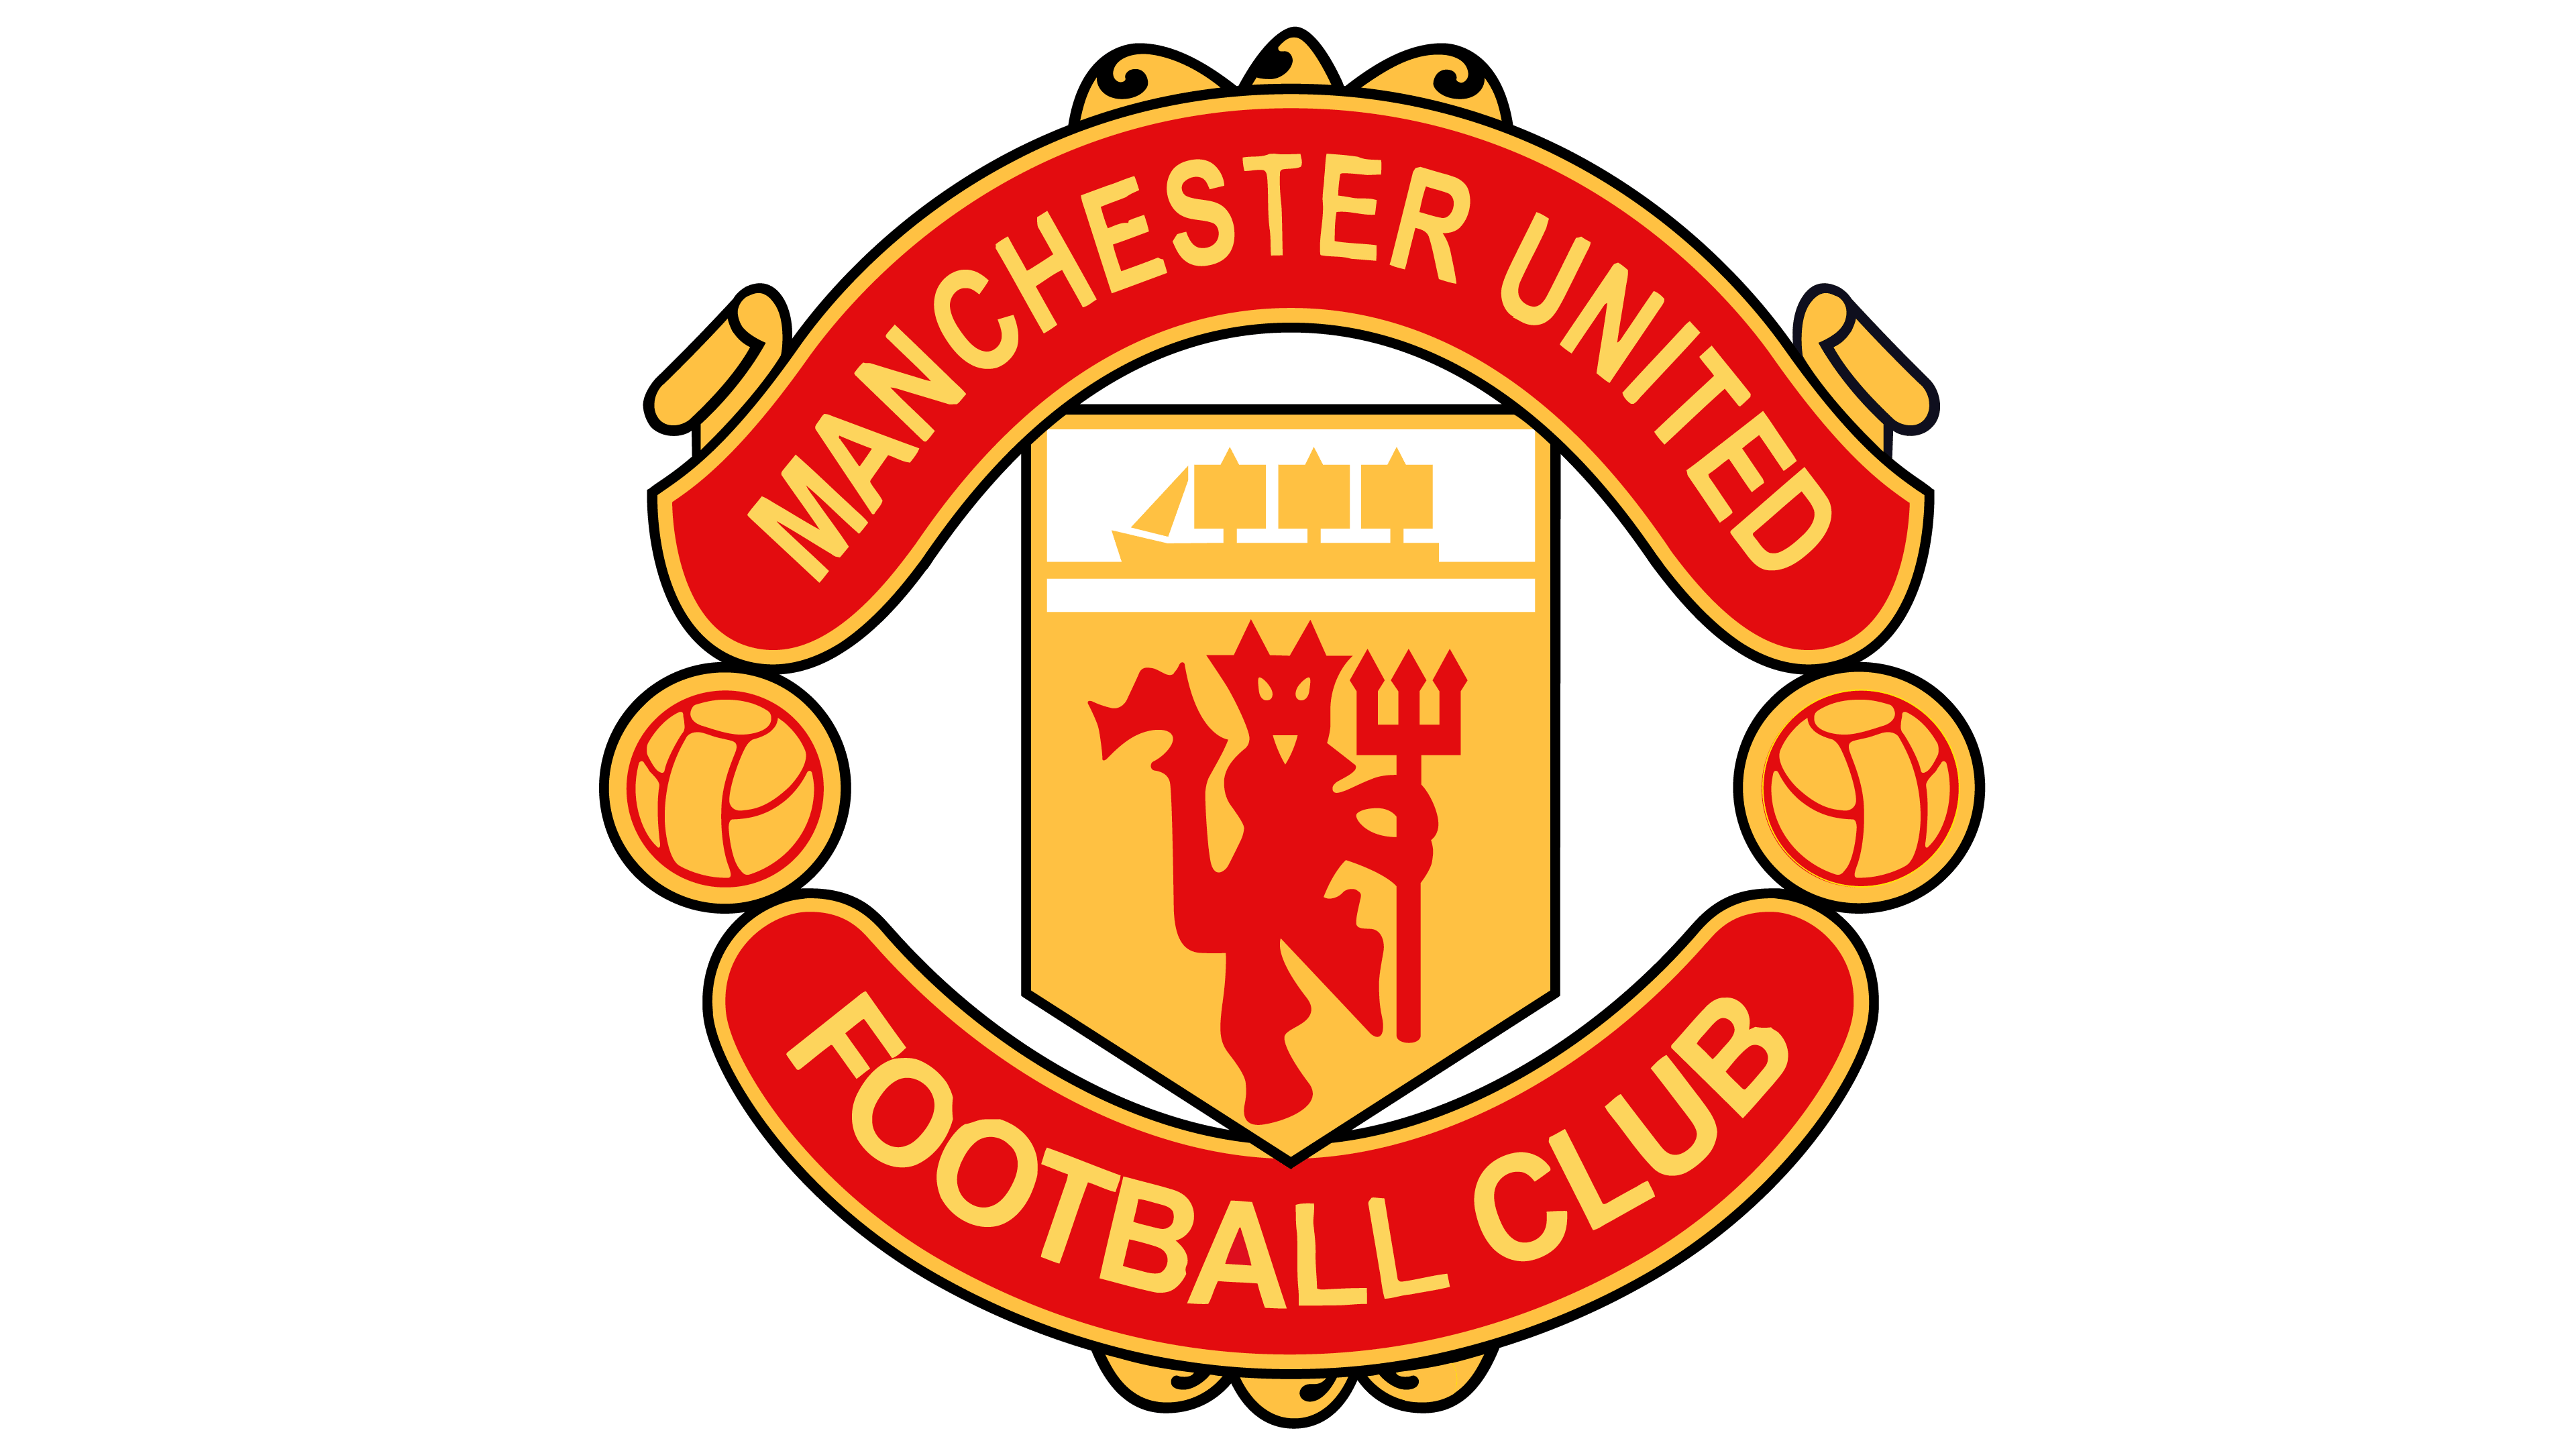 Manchester United Logo. The most famous brands and company logos in the world